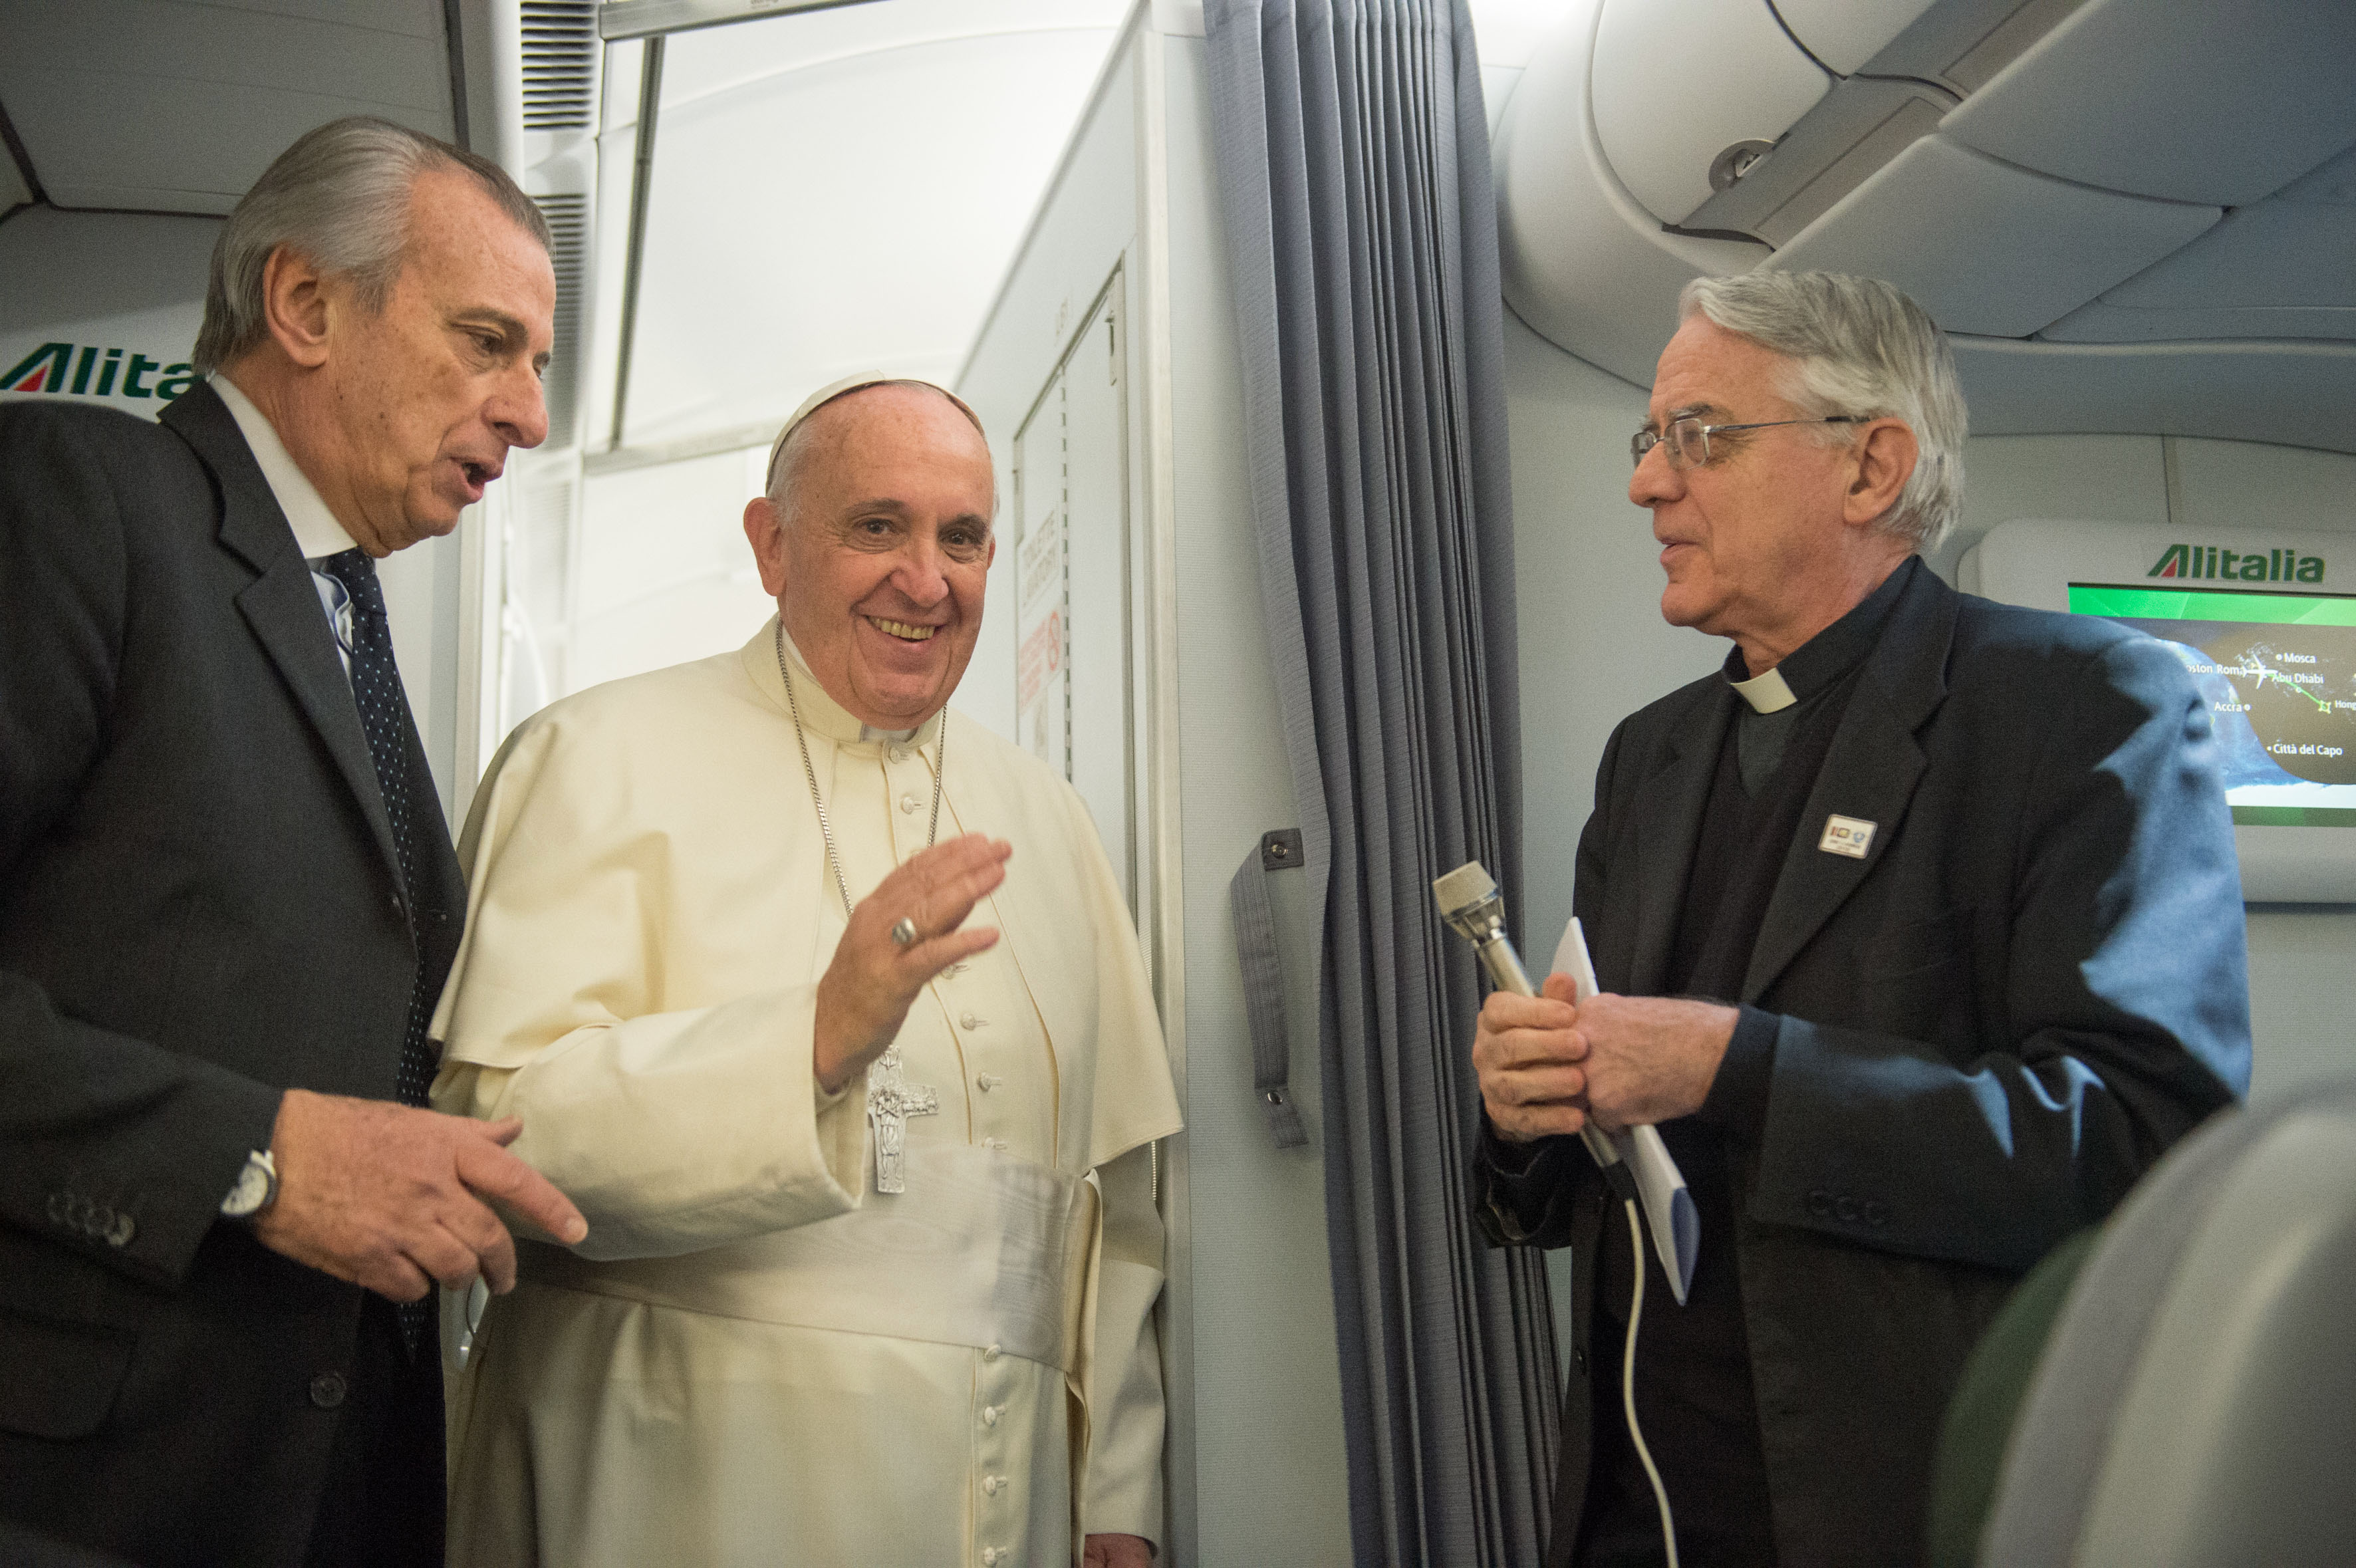 Pope Francis in airplane (archive)